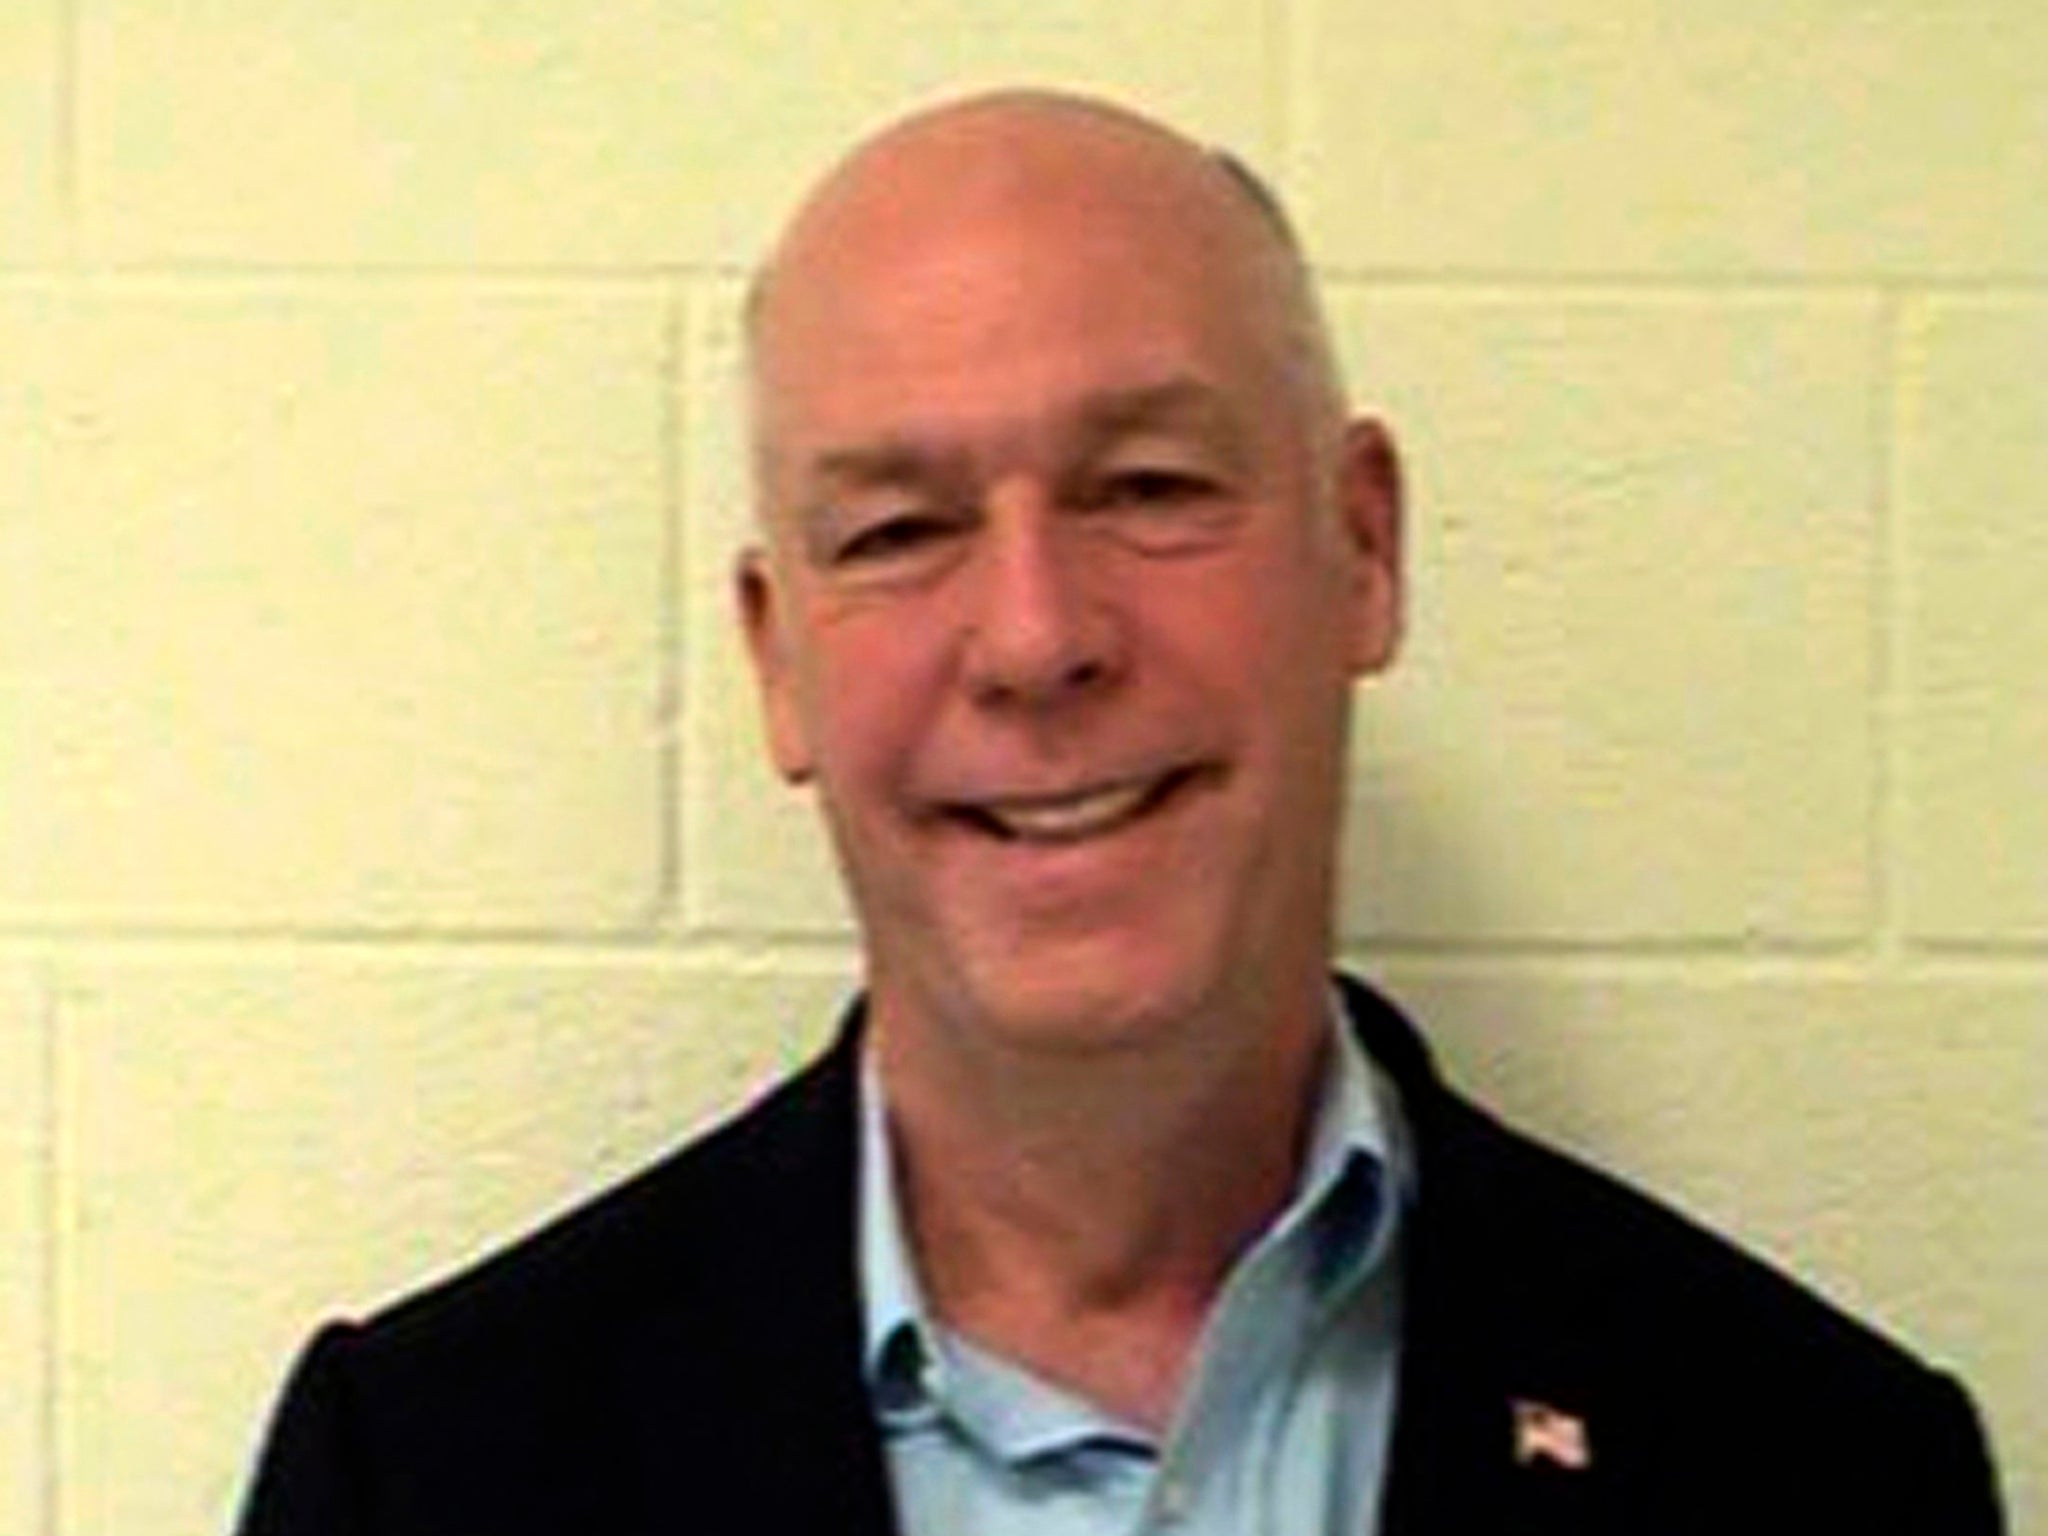 Greg Gianforte has been convicted of assaulting Guardian reporter Ben Jacobs on the eve of the special election that put him in office